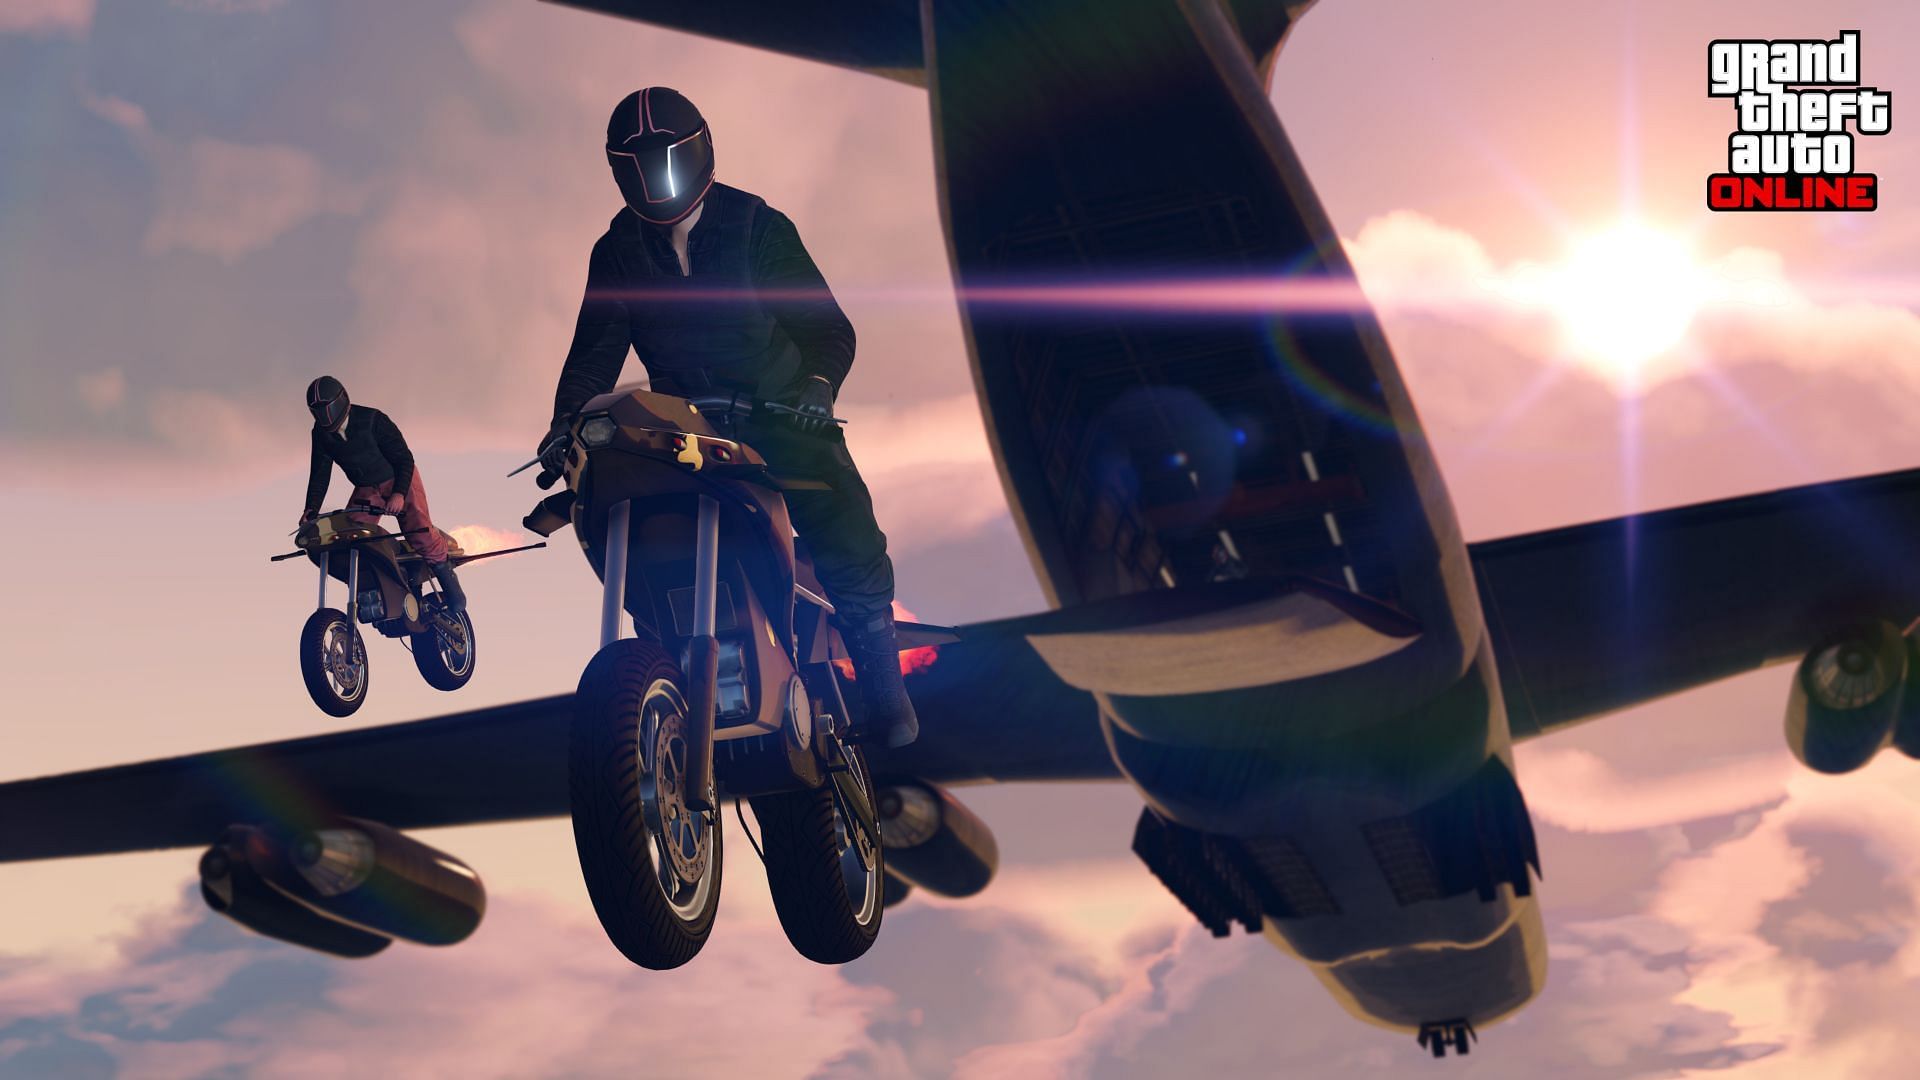 GTA Online players often resort to exploiting glitches to get ahead in-game (Image via Rockstar Games)